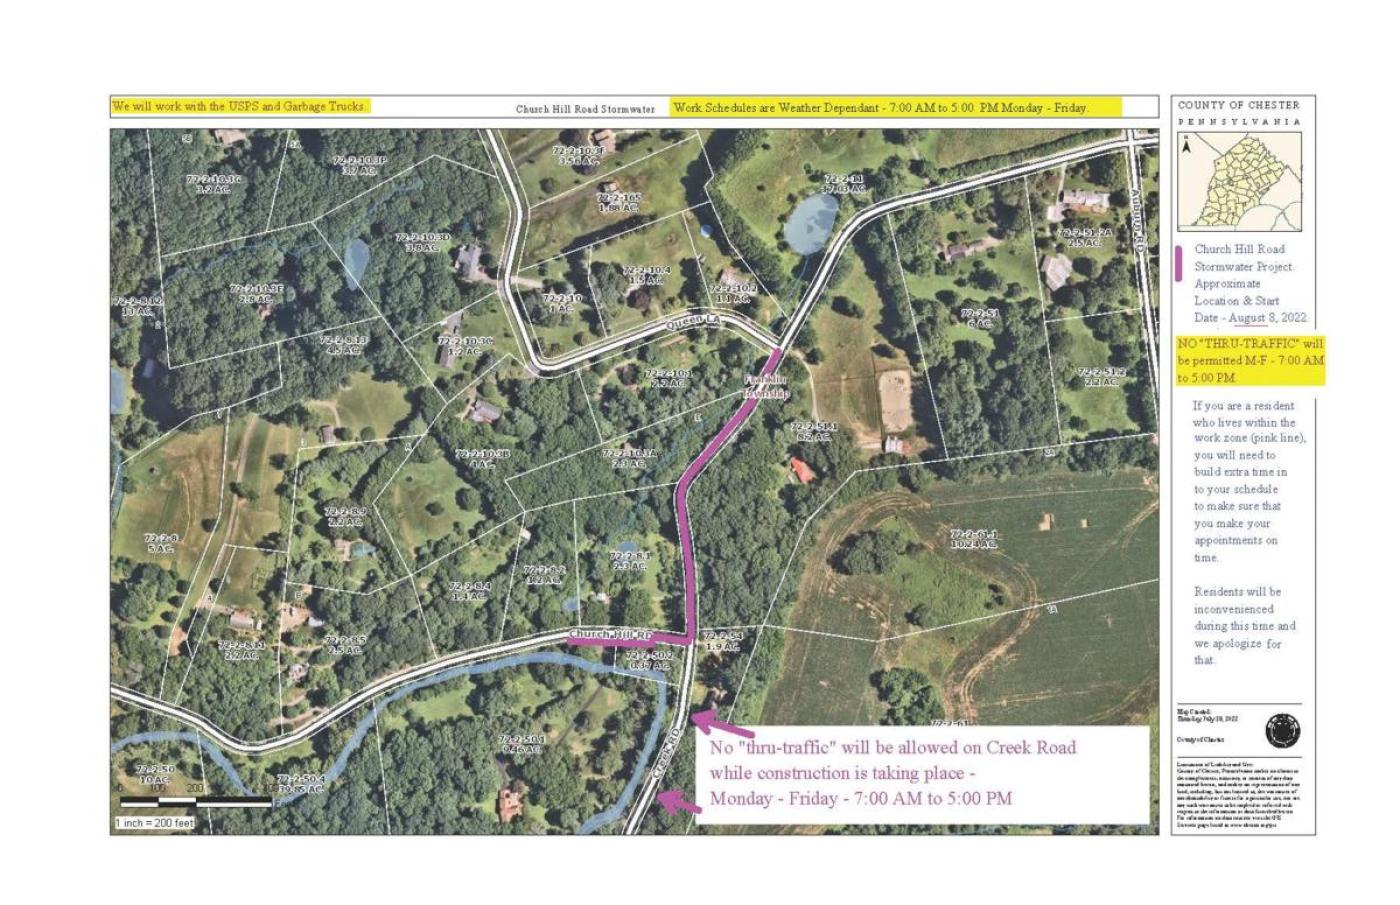 Church Hill Road - Stormwater Project - Estimated Start - August 8, 2022